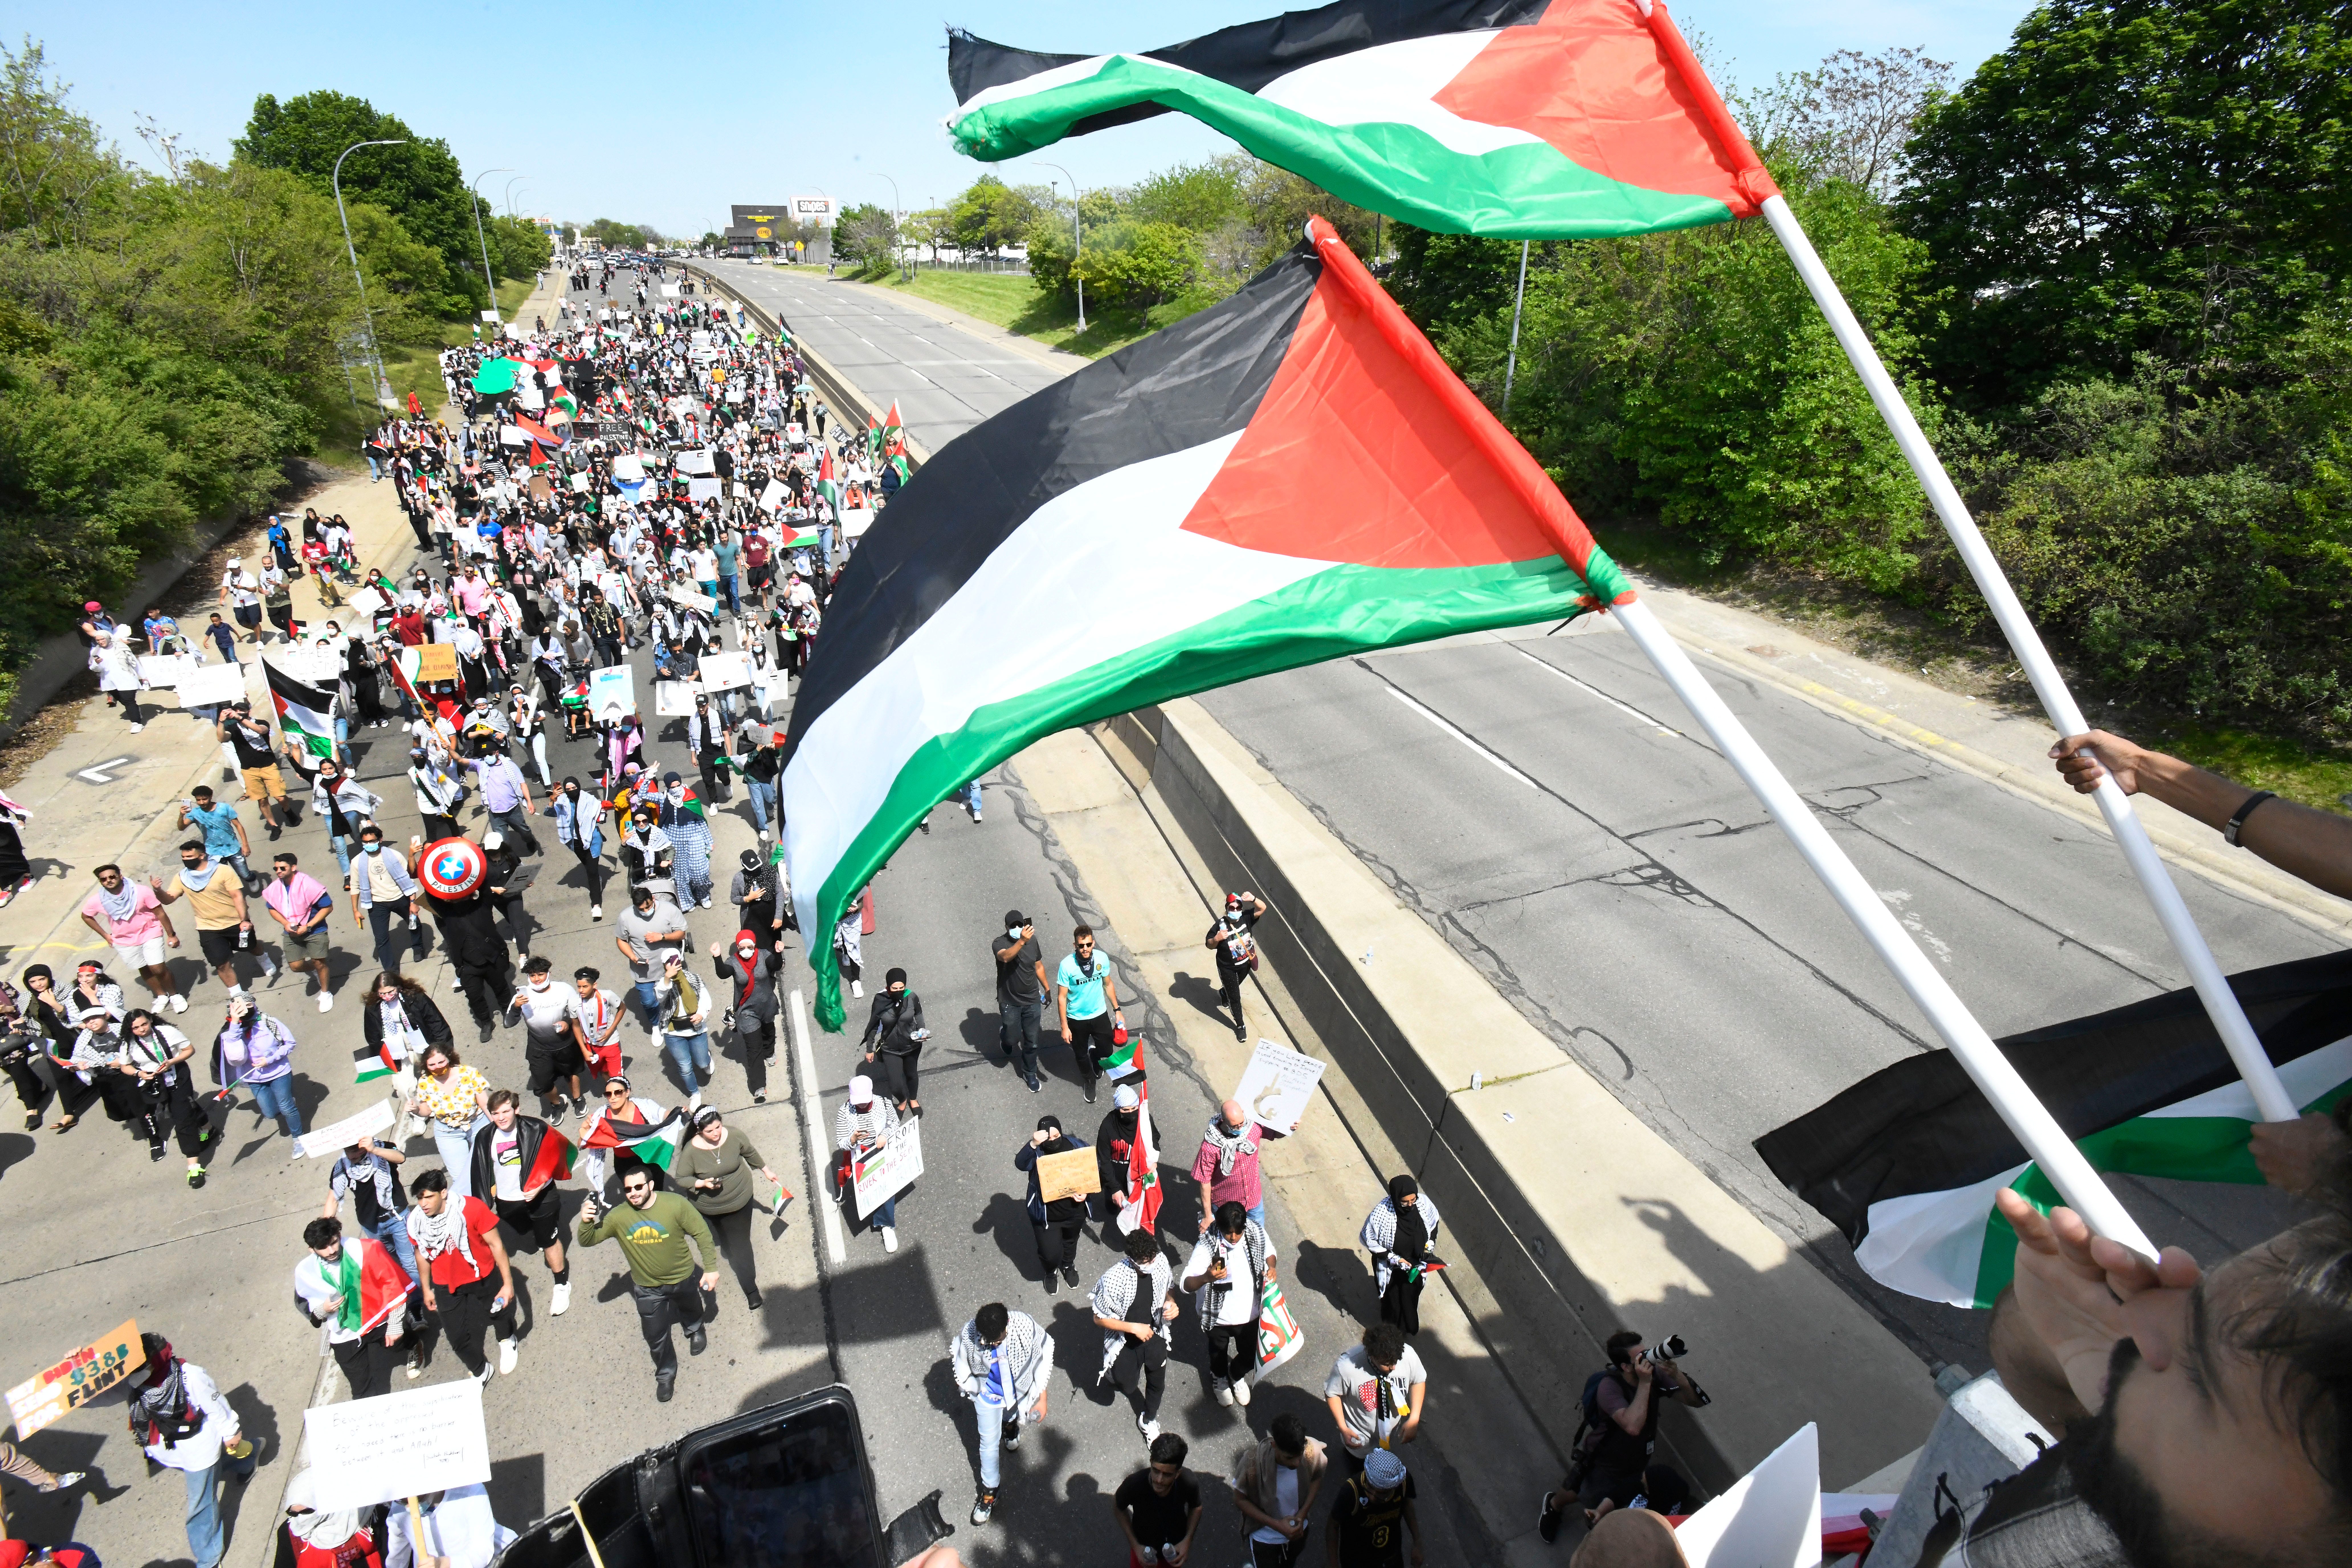 Thousands of Palestinian supporters march down westbound Michigan Avenue during a Palestinian protest and march, at the same time President Joe Biden is visiting in another part of Dearborn, Michigan on May 18, 2021.